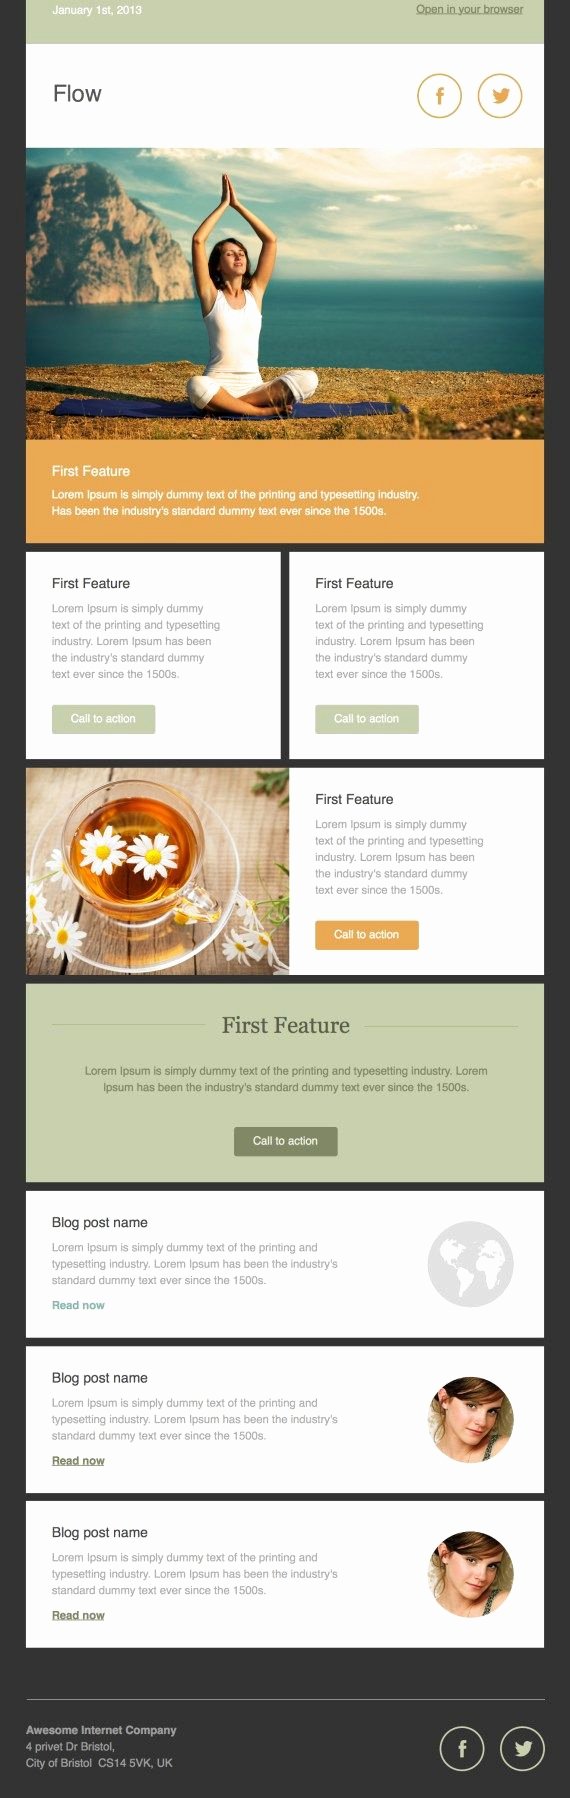 Free Downloadable Newsletter Template Fresh 40 Best Email Newsletter Templates HTML Psd Free